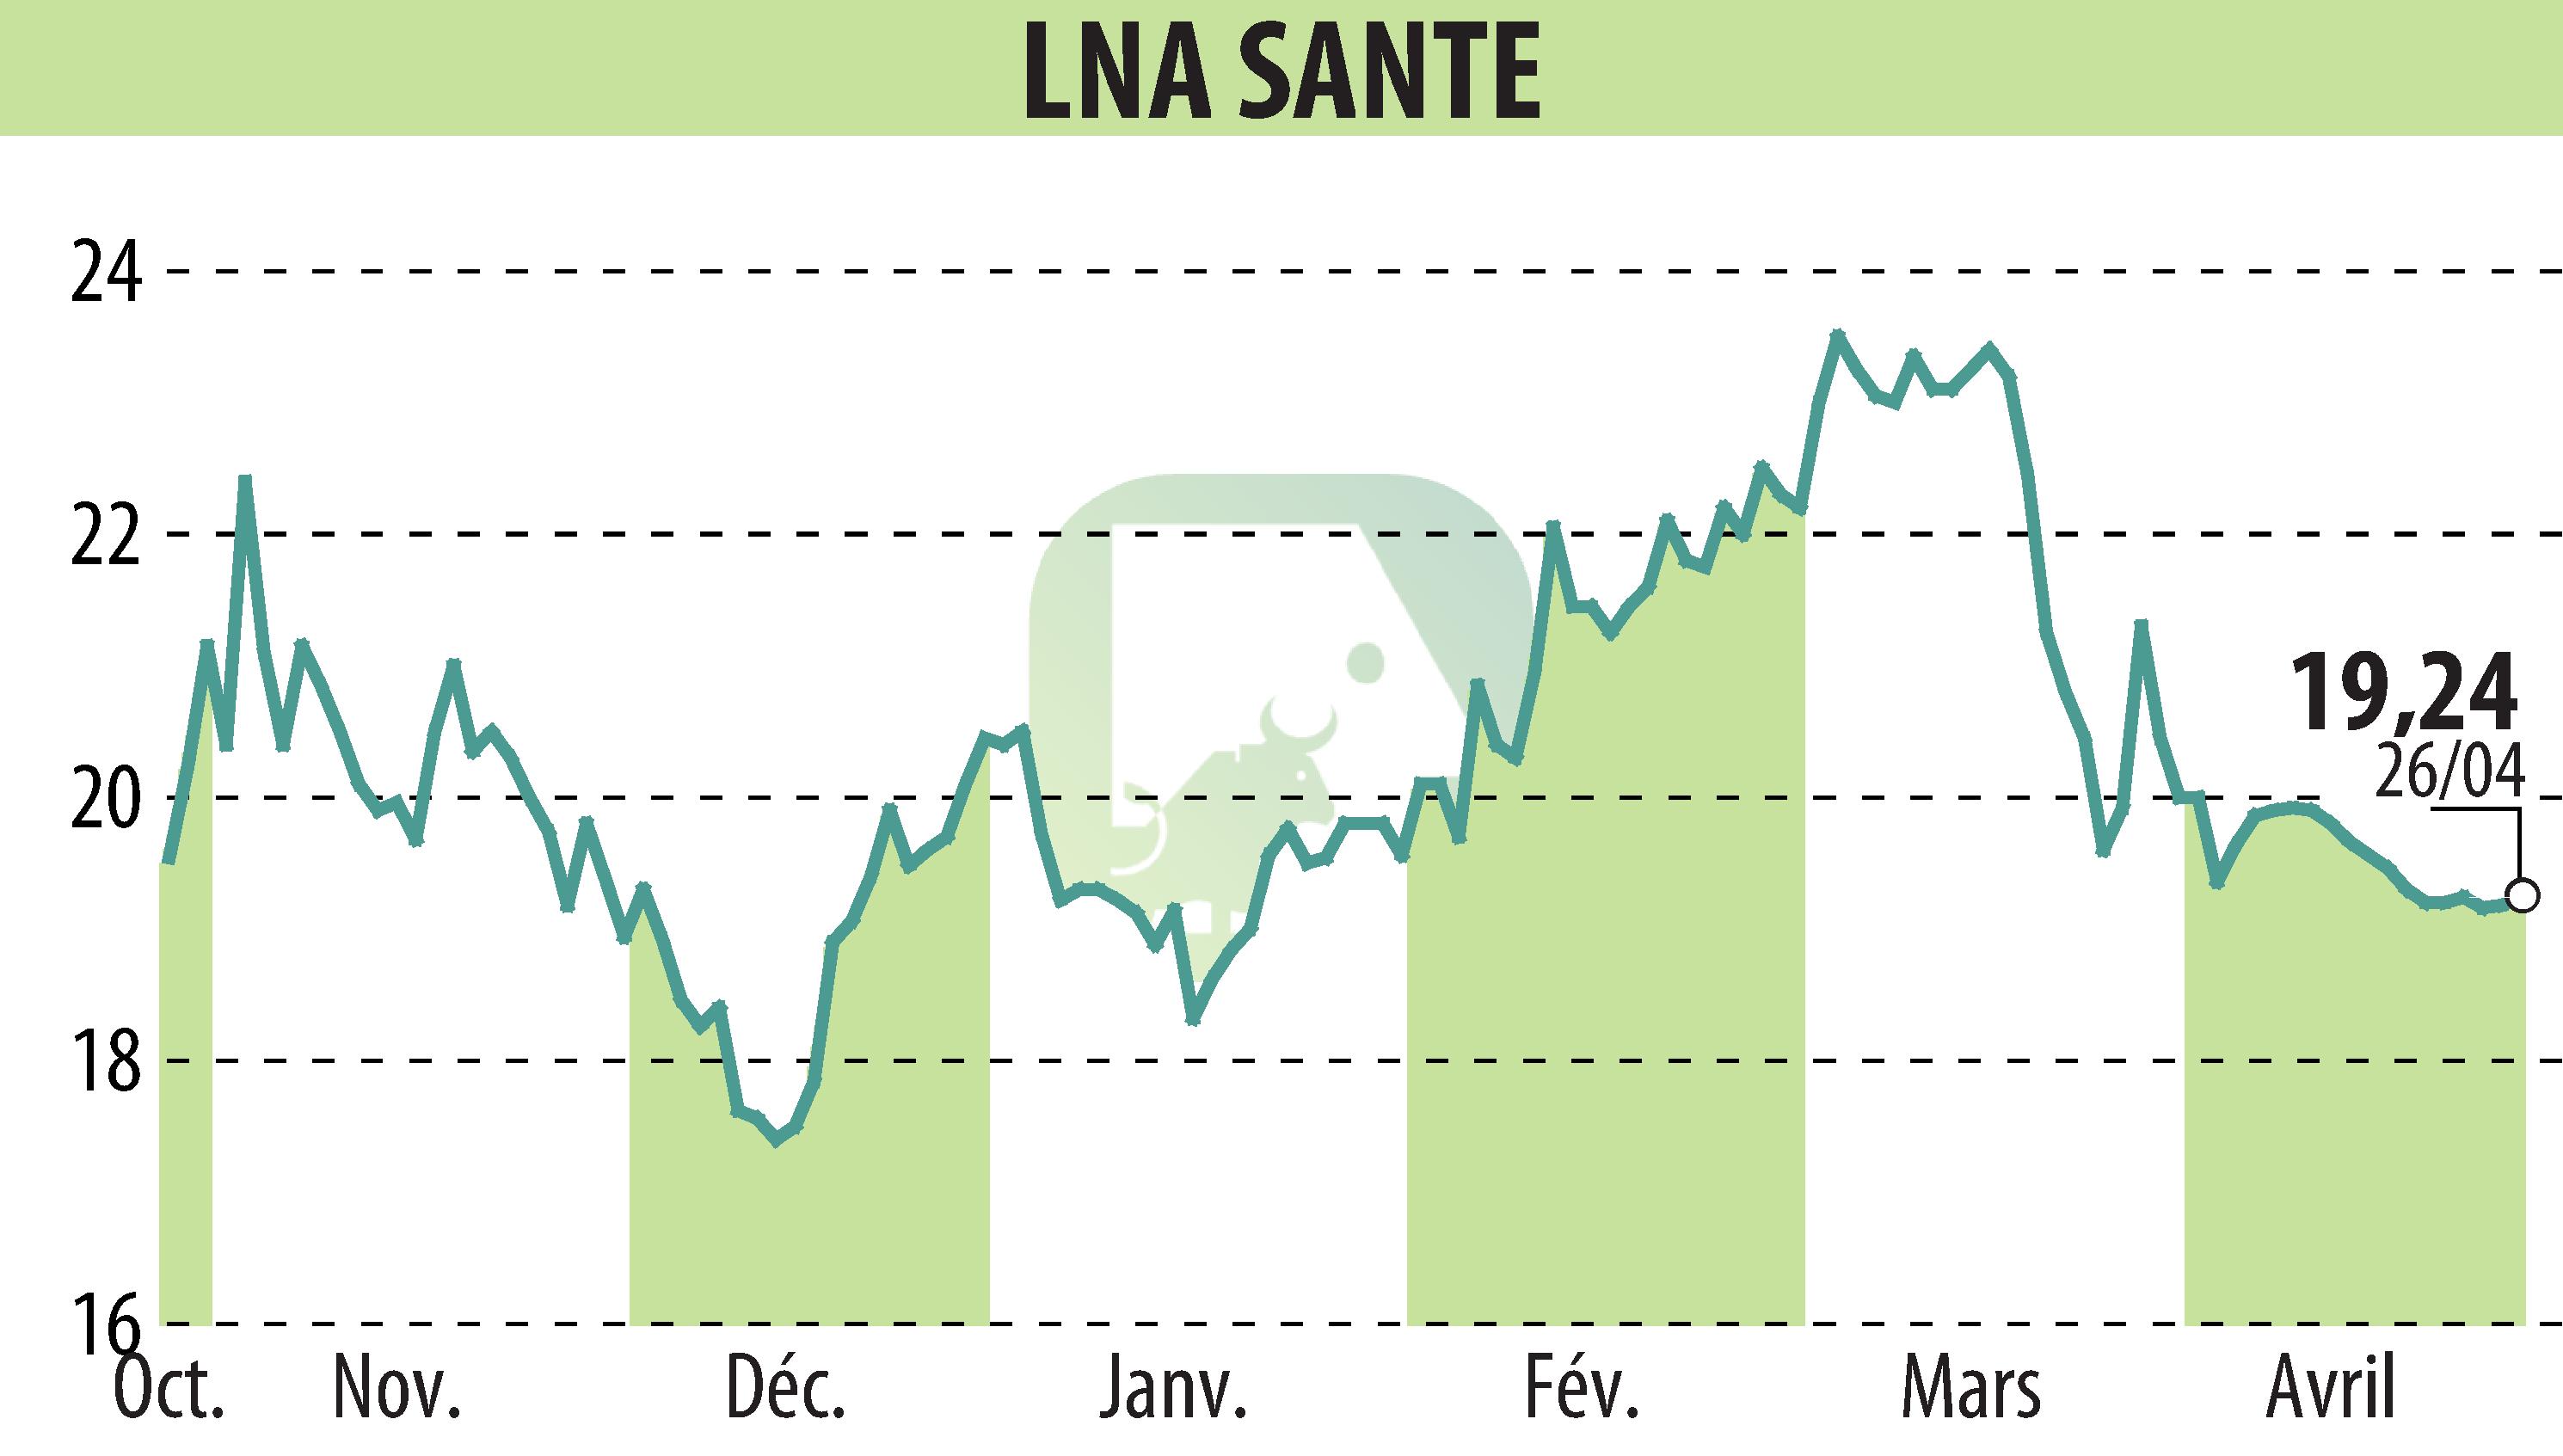 Stock price chart of LNA SANTE (EPA:LNA) showing fluctuations.